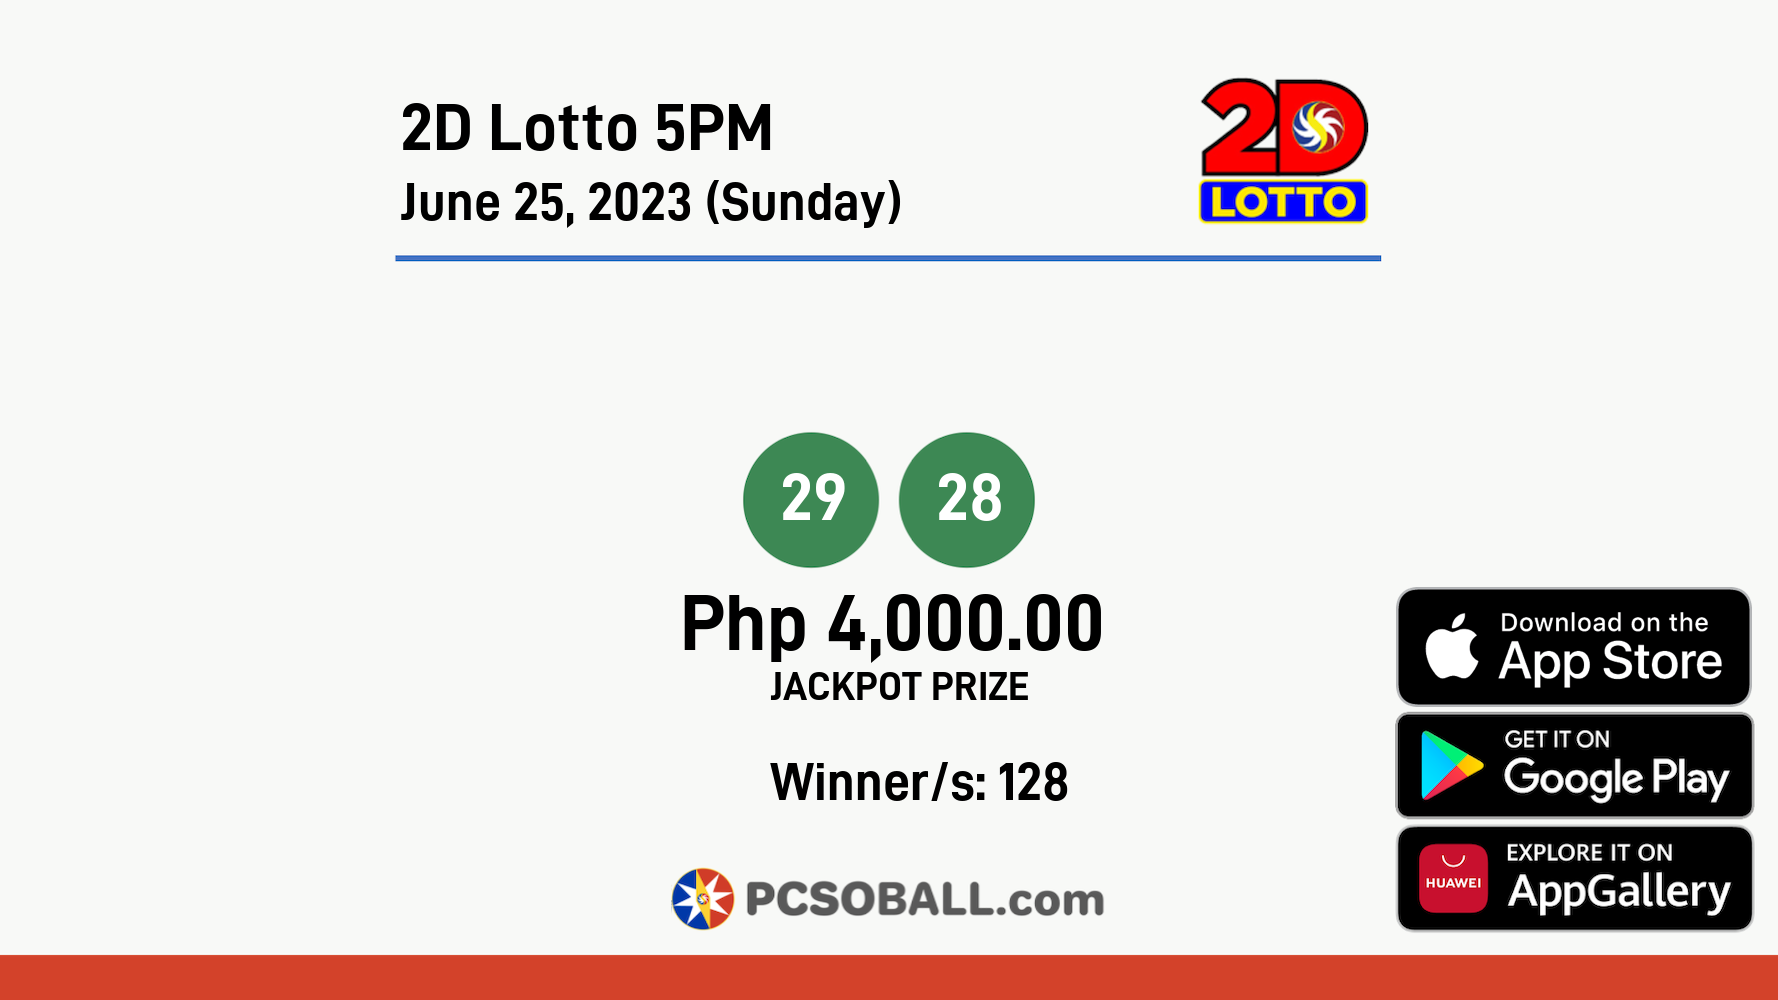 2D Lotto 5PM June 25, 2023 (Sunday) Result